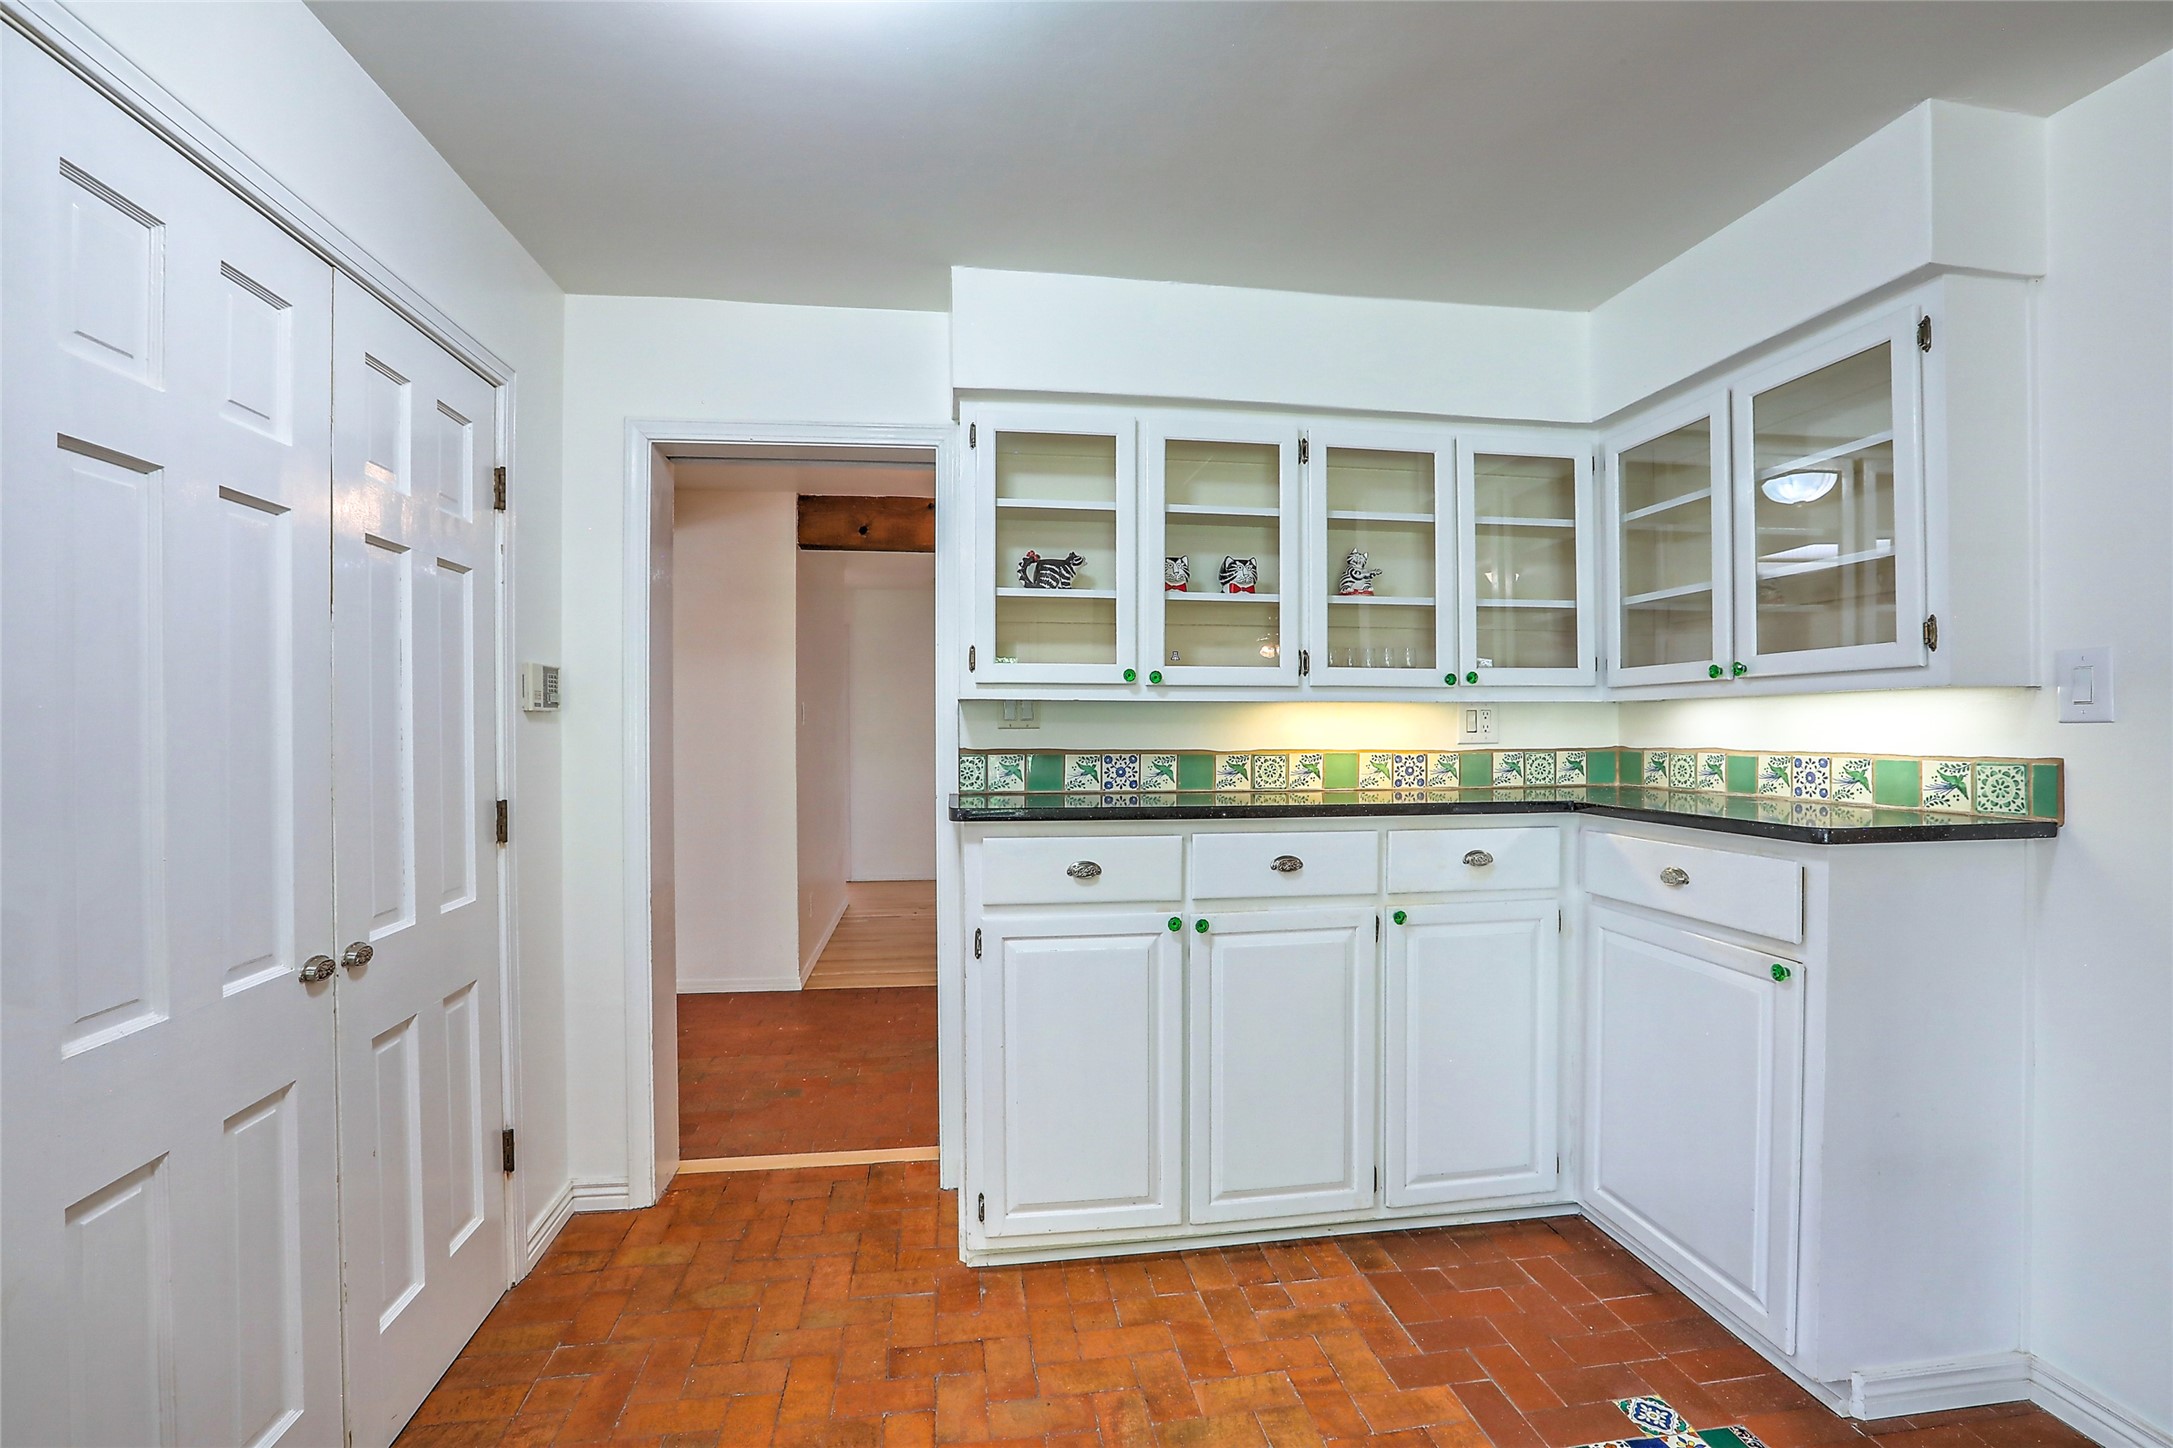 Built in cabinetry for lots of storage